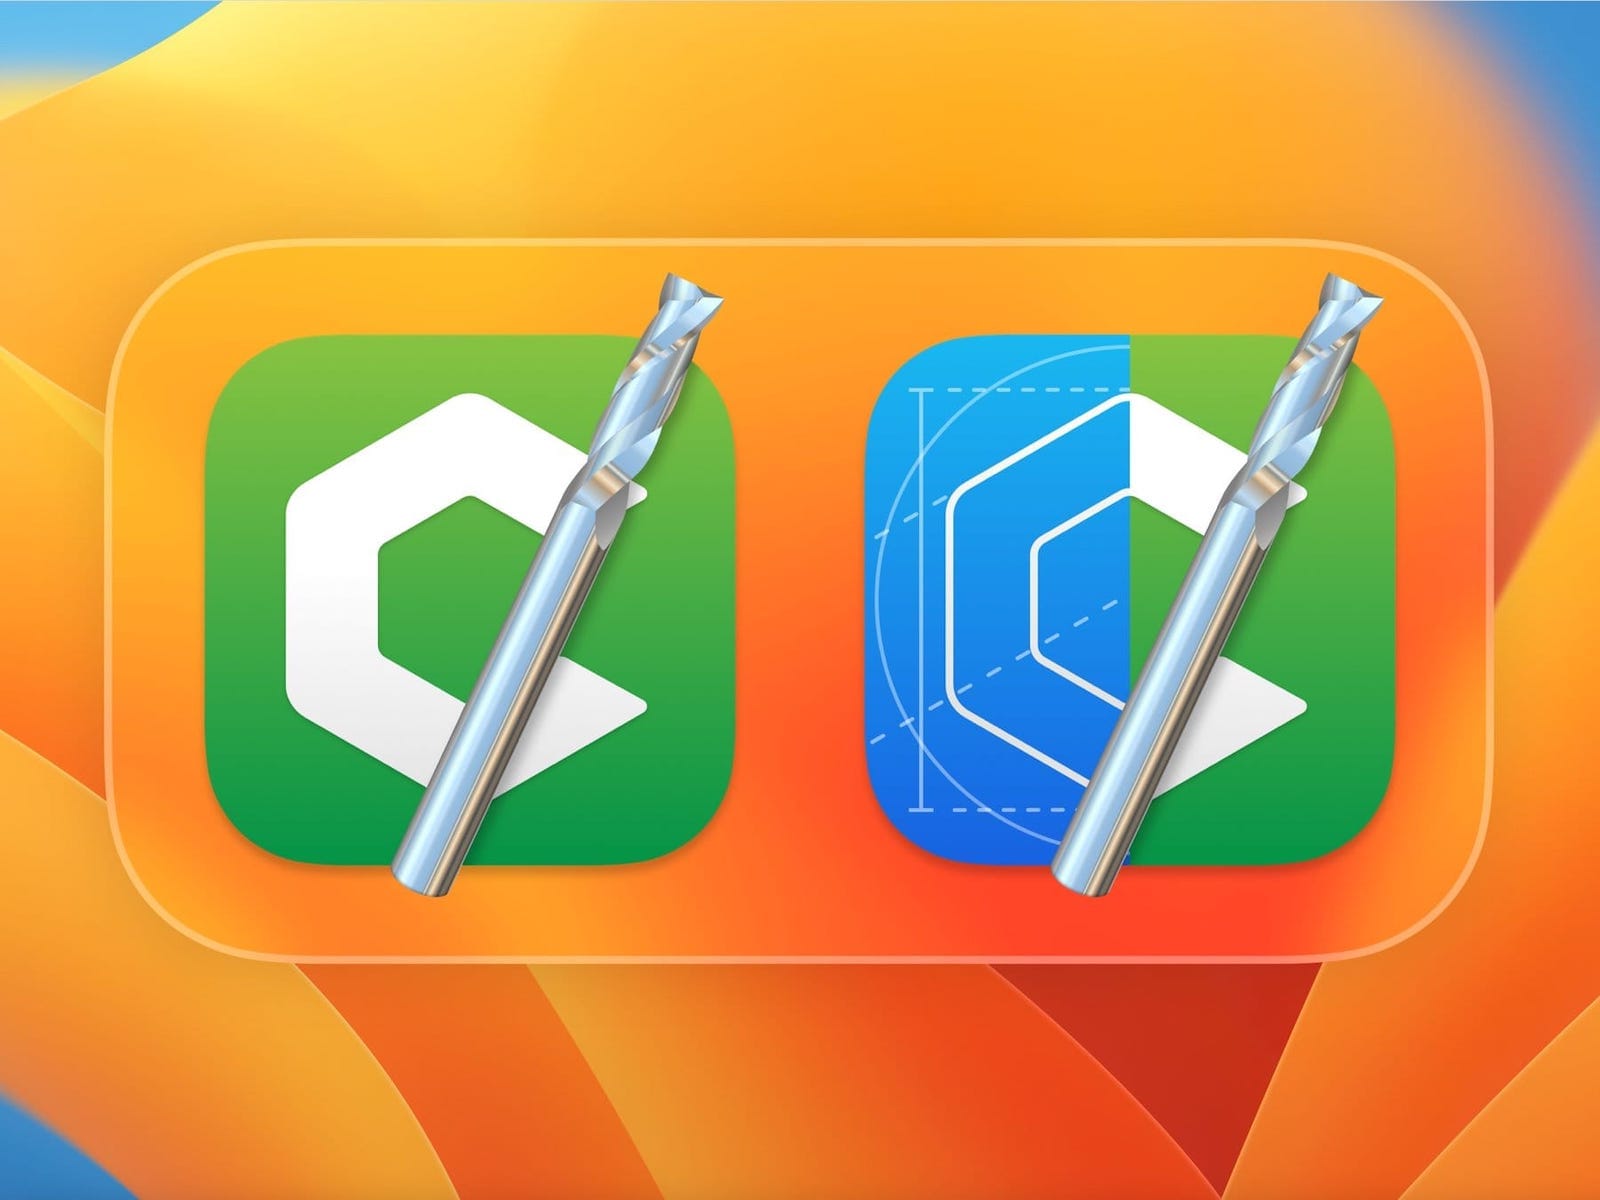 Two app icons with a realistic silver, reflective drill bit poised at an angle and jutting out over the edges of the icon.